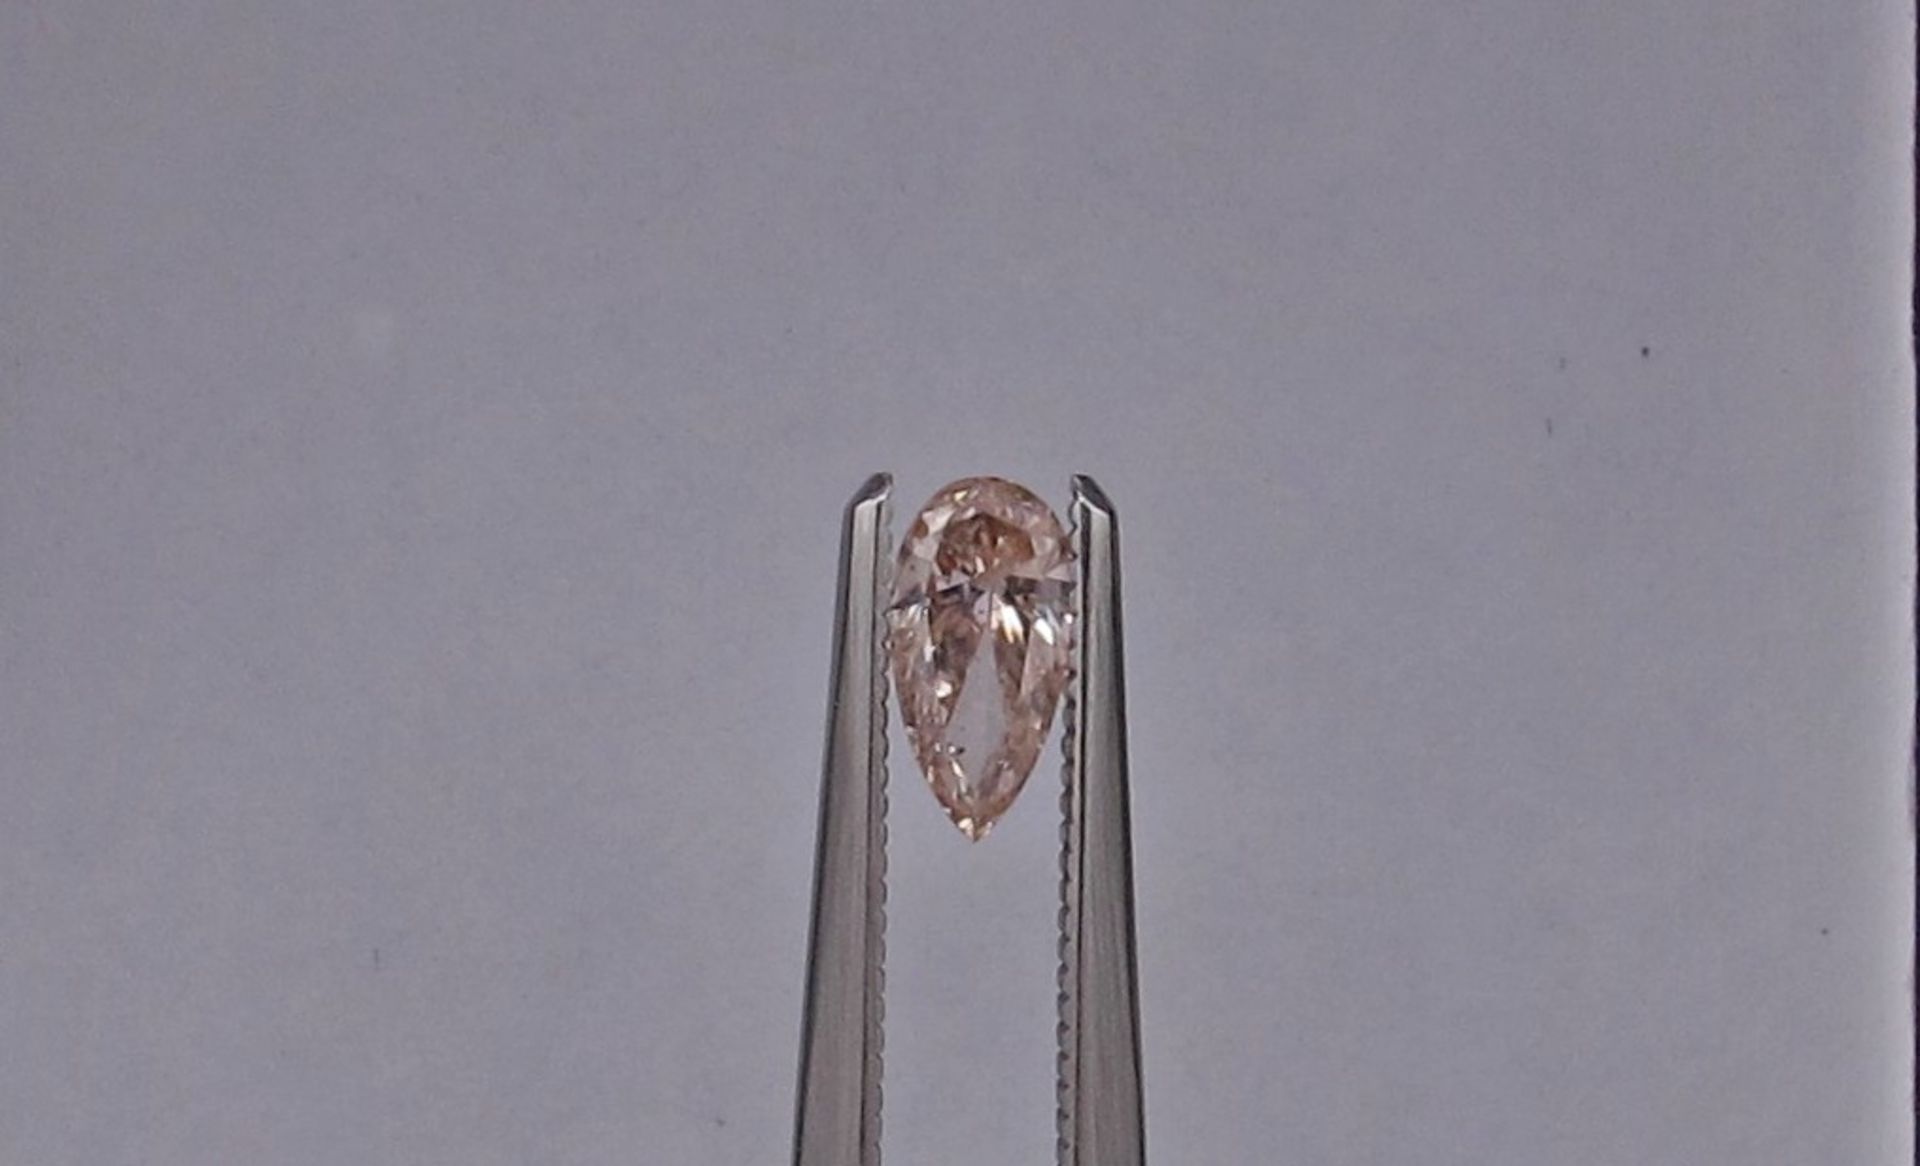 An unmounted Pear-shaped diamond weighing app. 0.43ct.